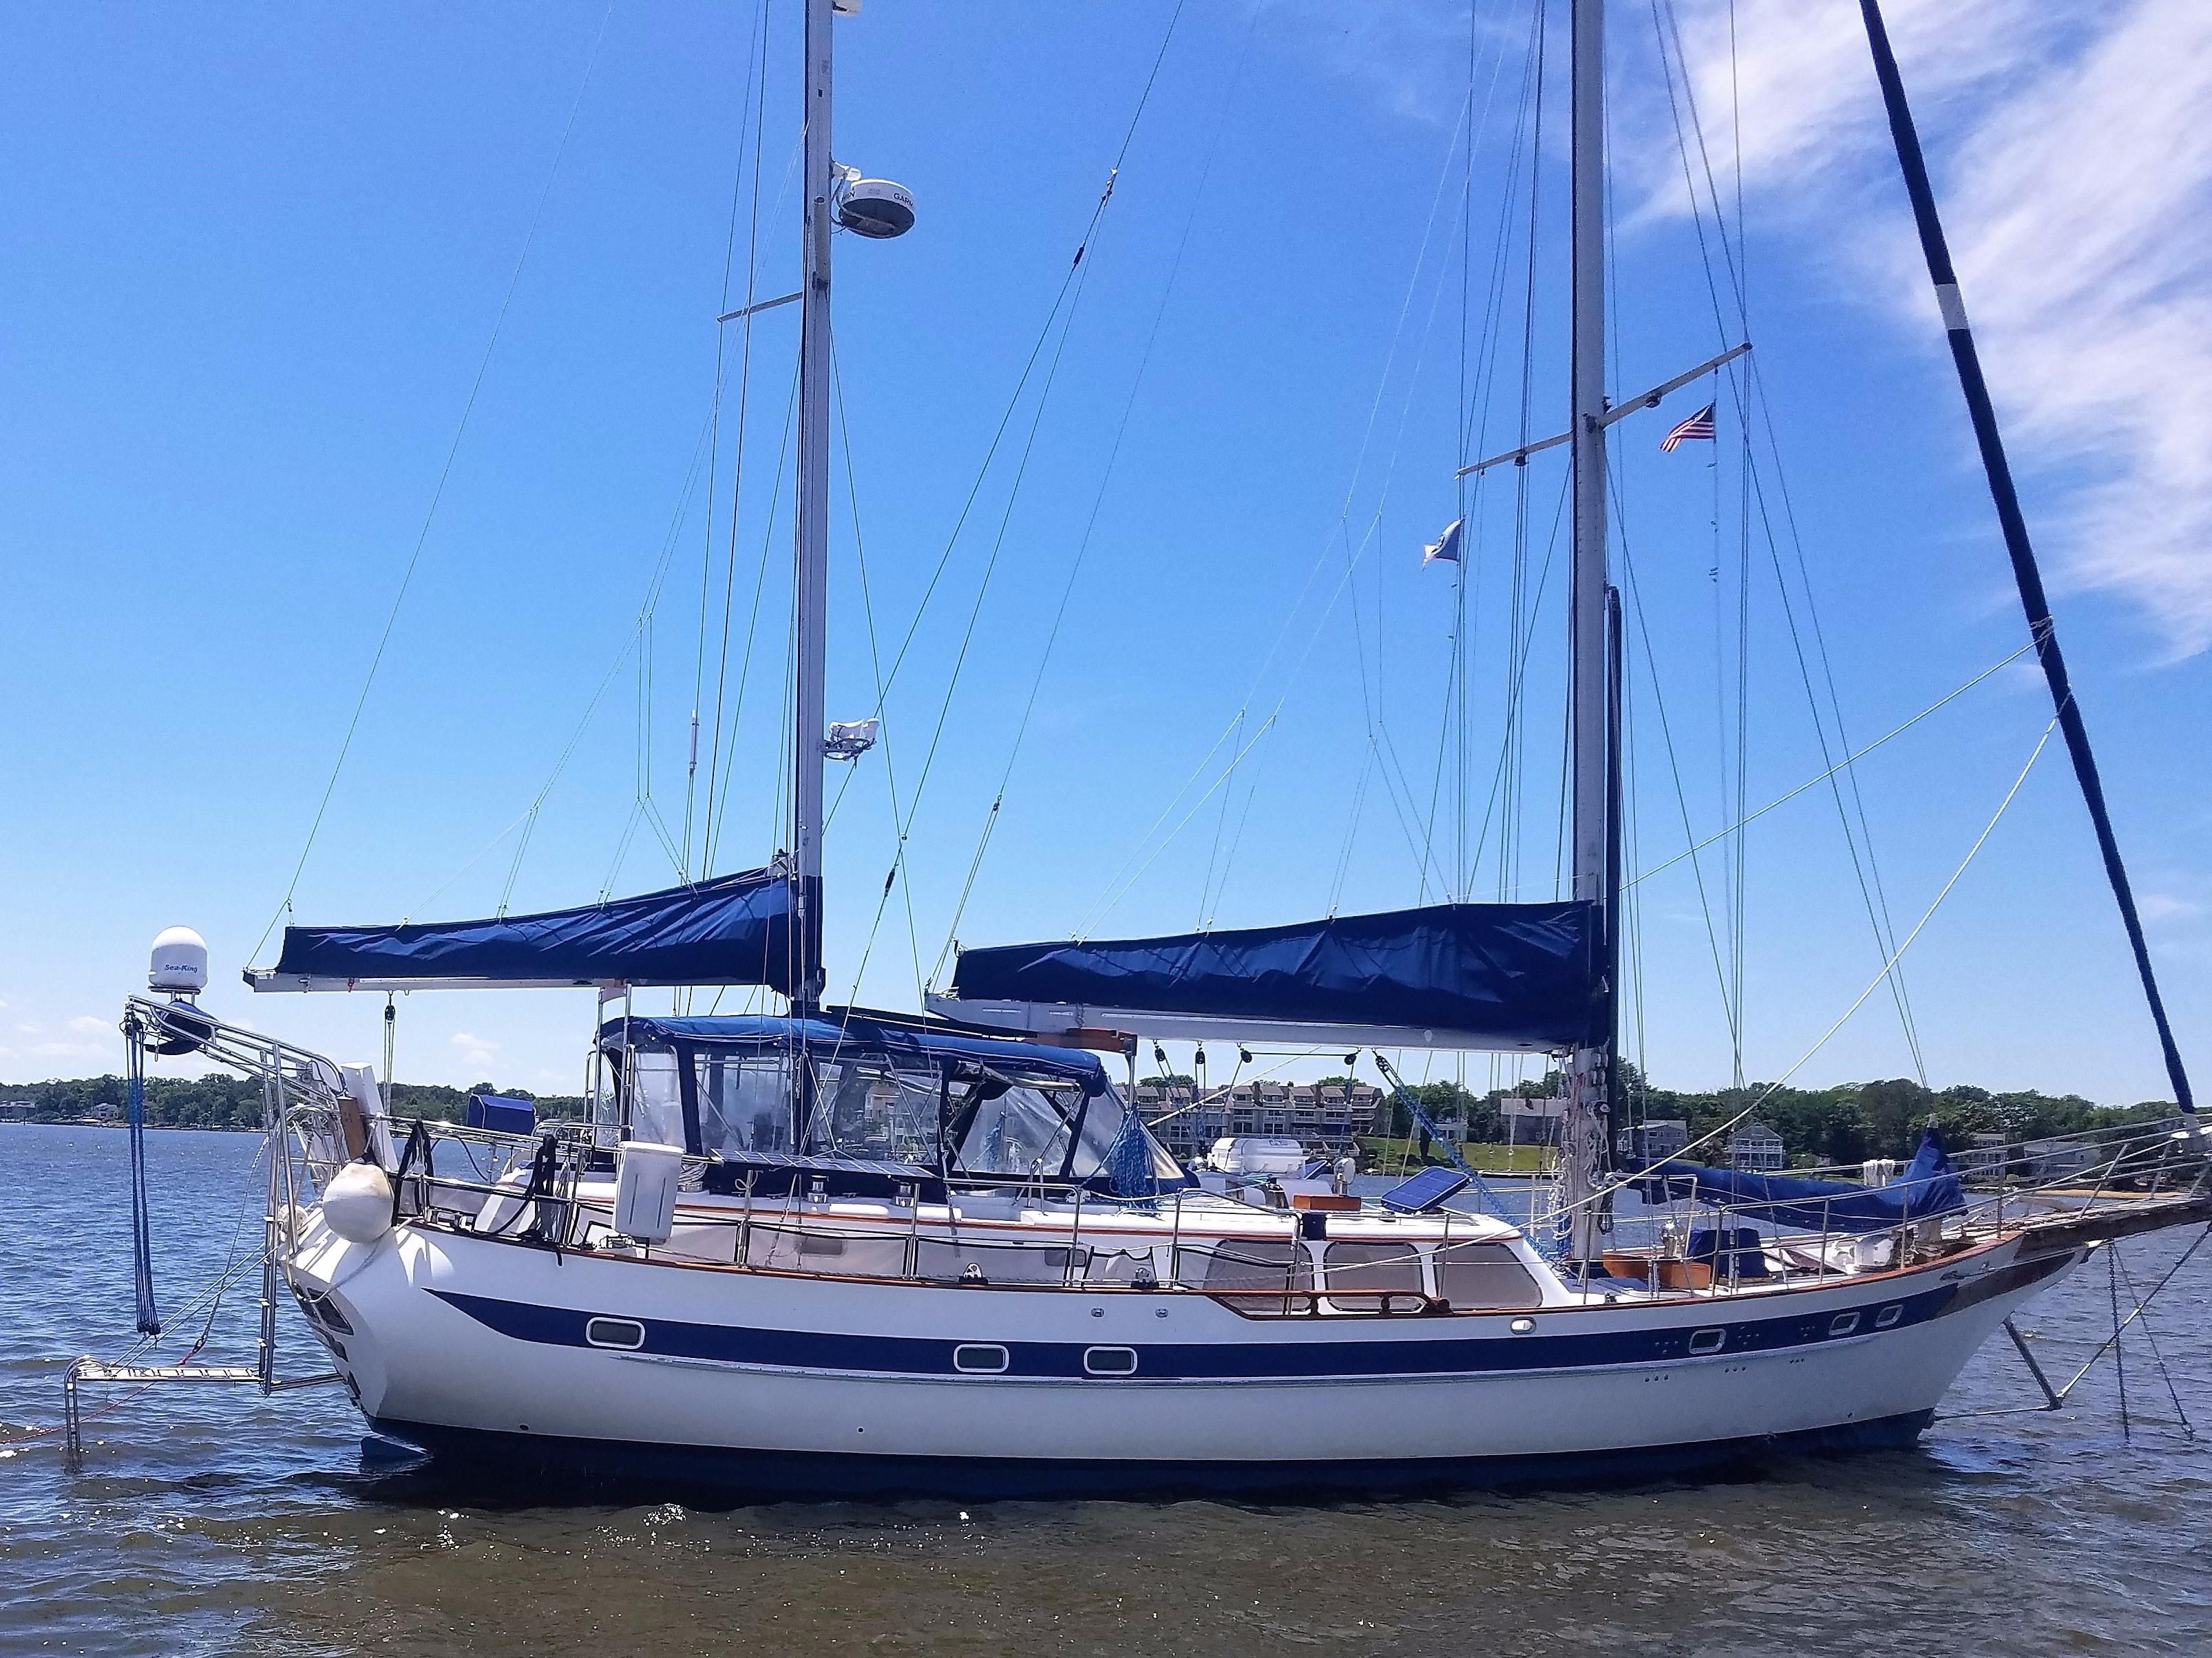 1989 Ta Chiao CT-56 Sail Boat For Sale - www.yachtworld.com